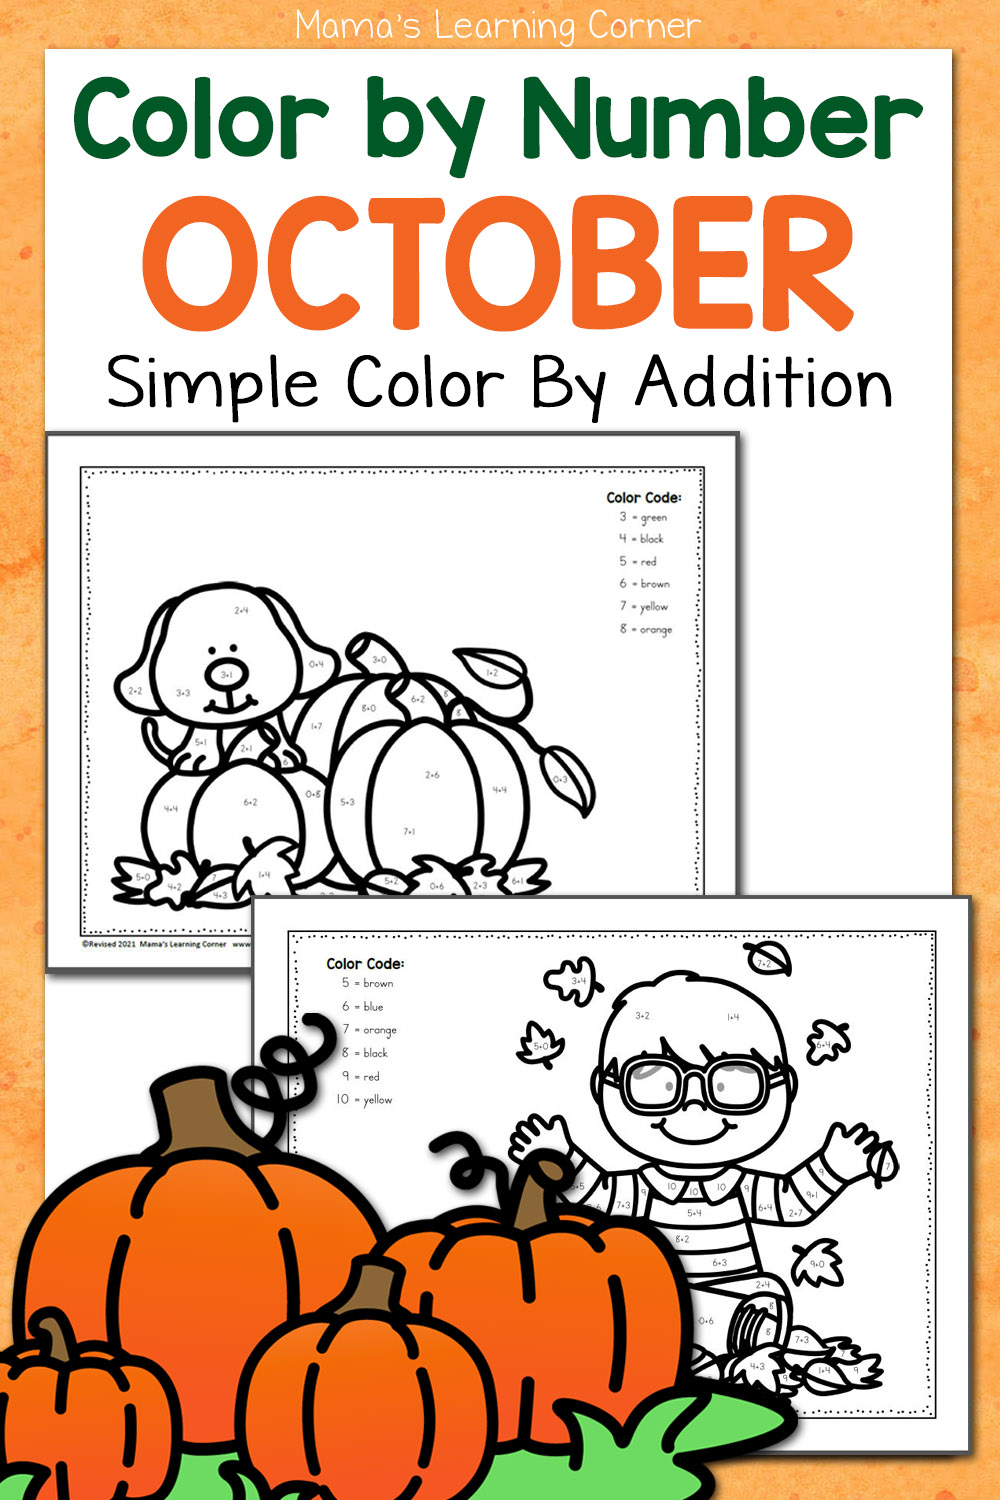 October Color By Number Worksheets Mamas Learning Corner